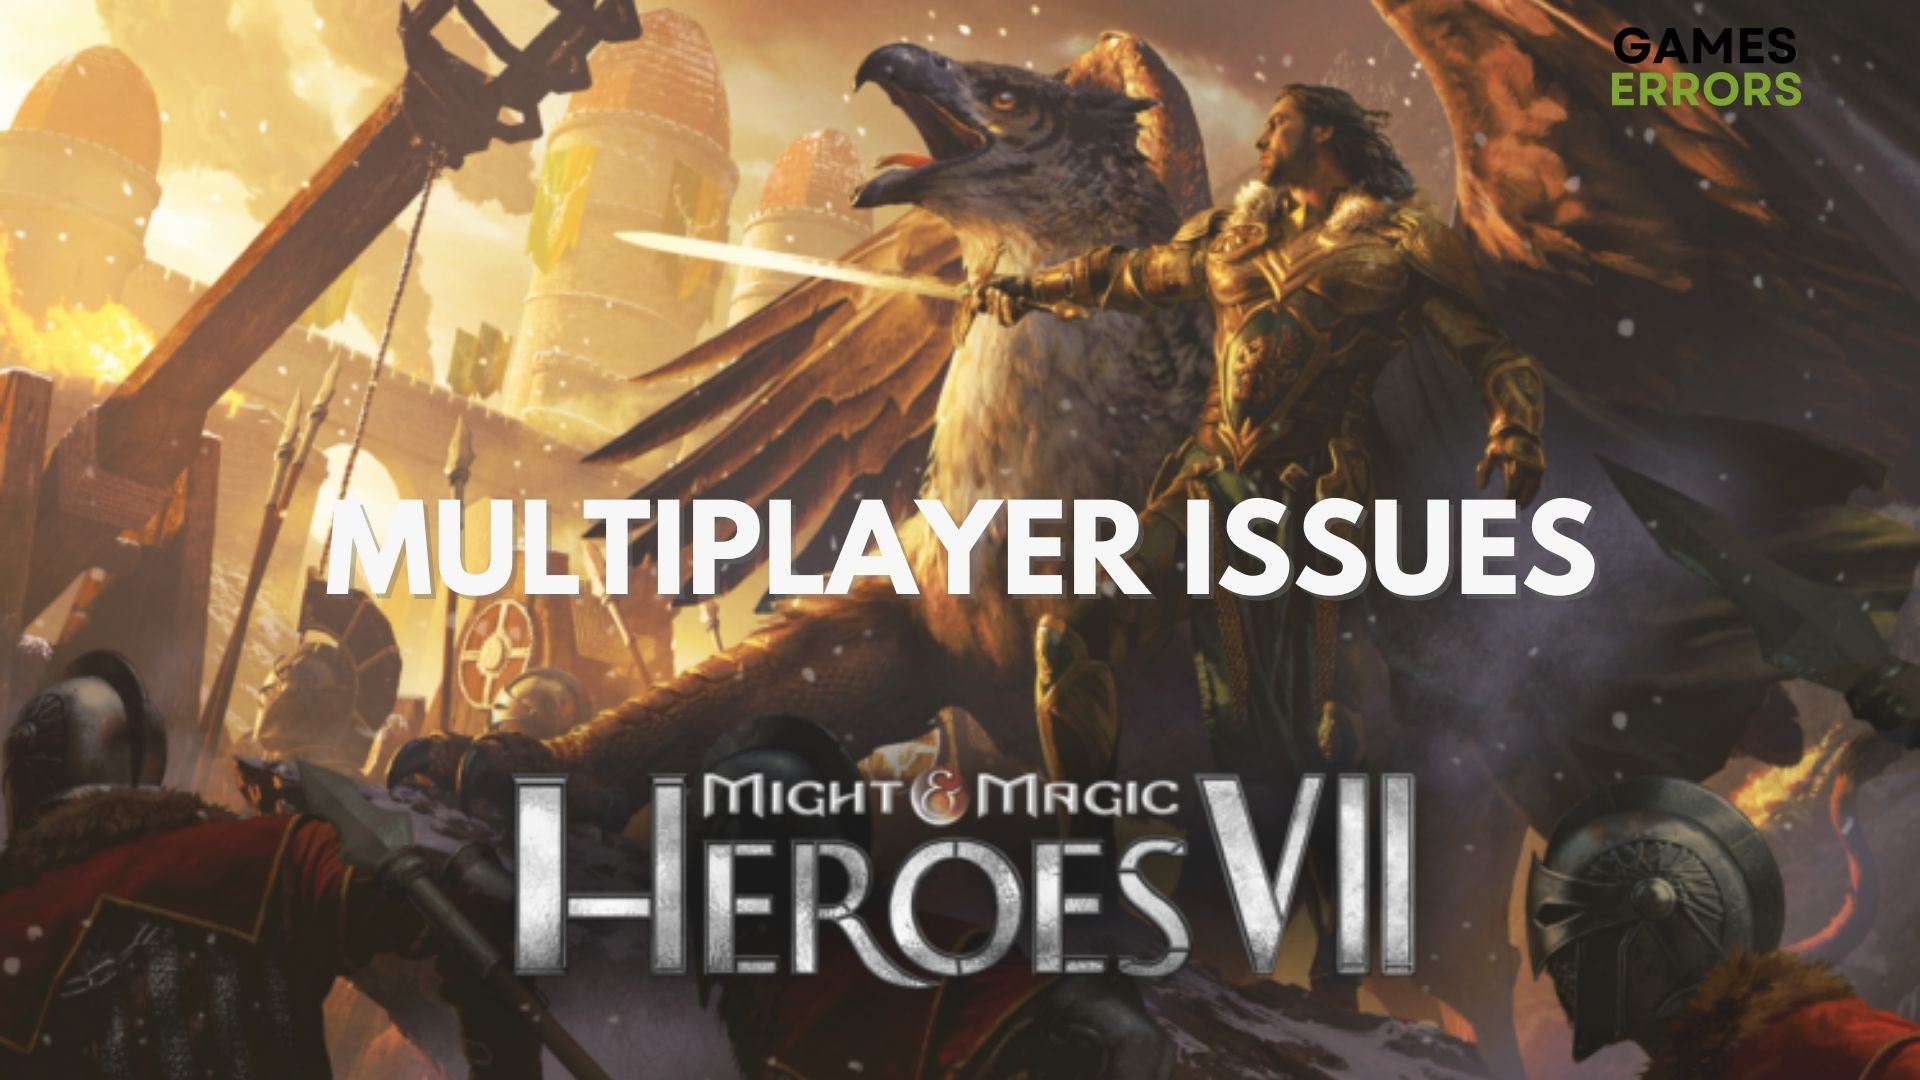 Heroes 7 Multiplayer issues